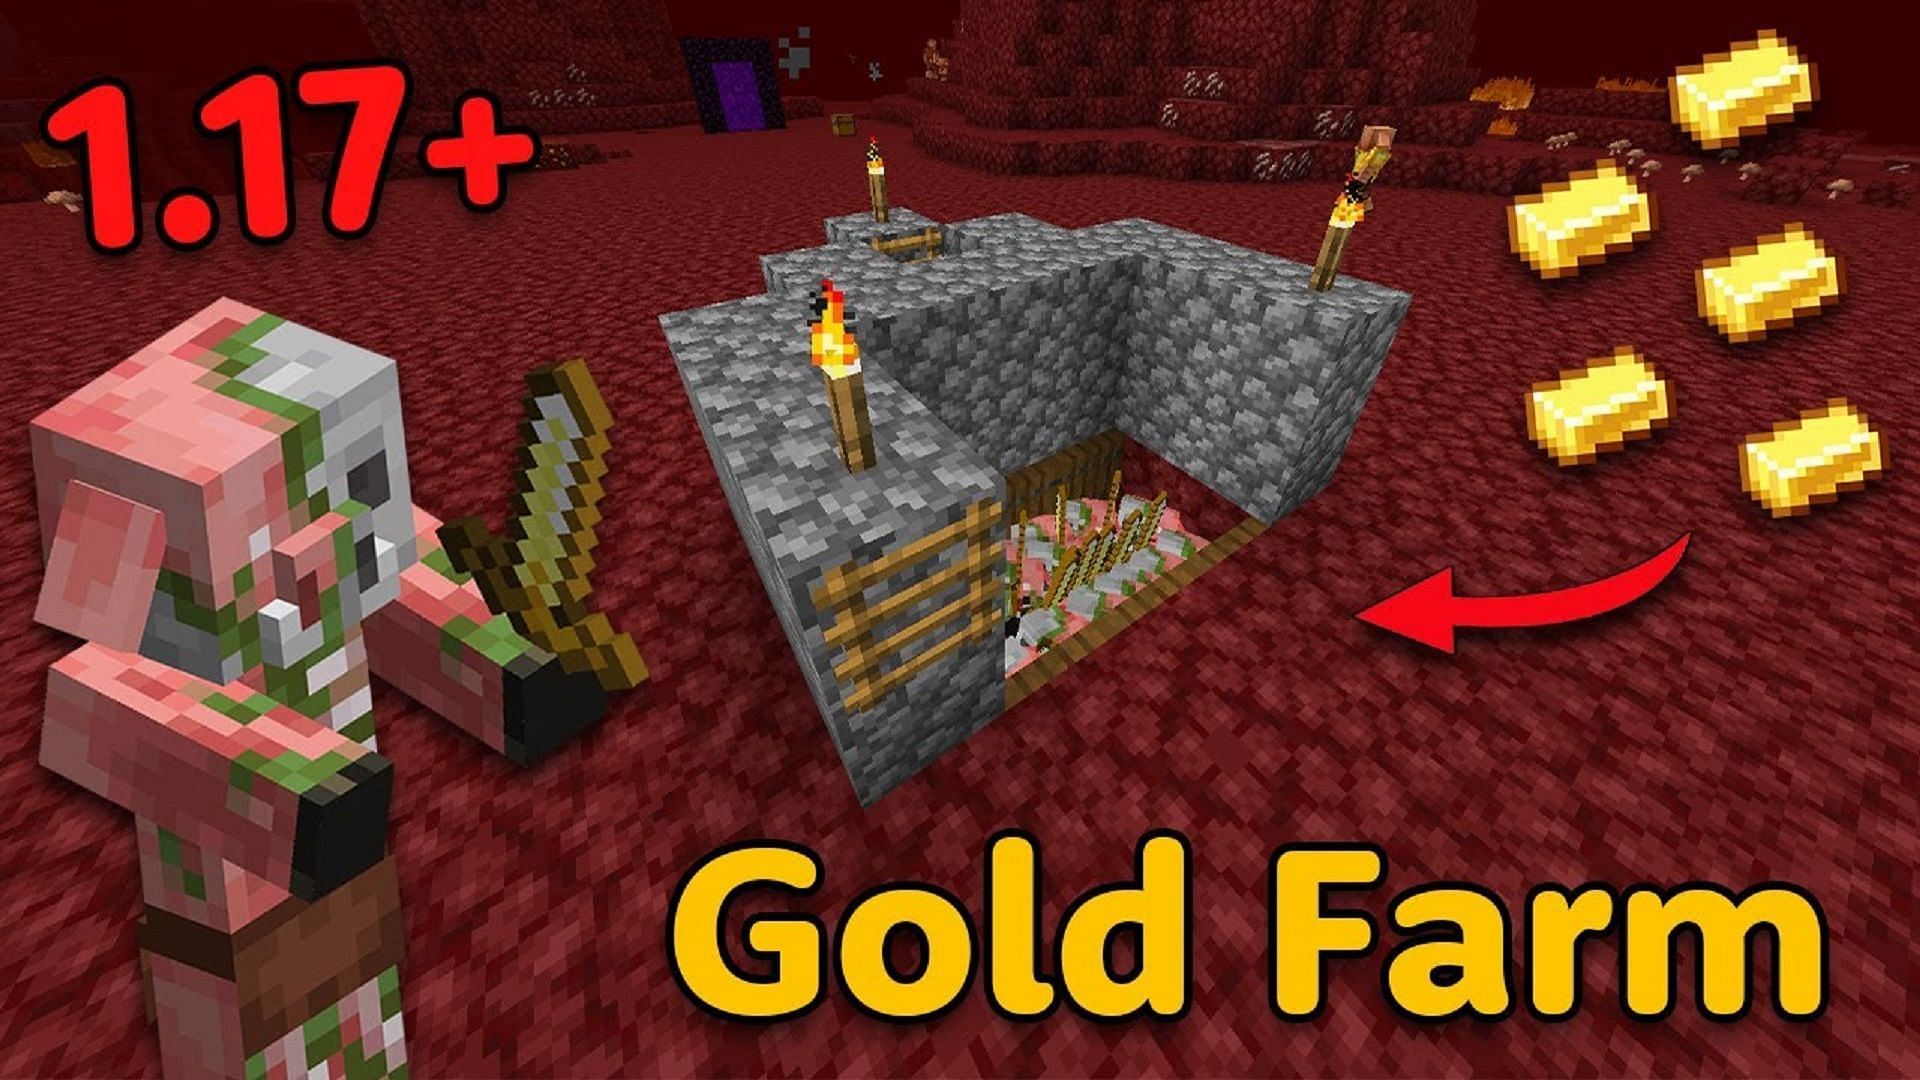 Farming zombie piglins in the Nether provides XP and gold (Image via j4kefradz/Youtube)